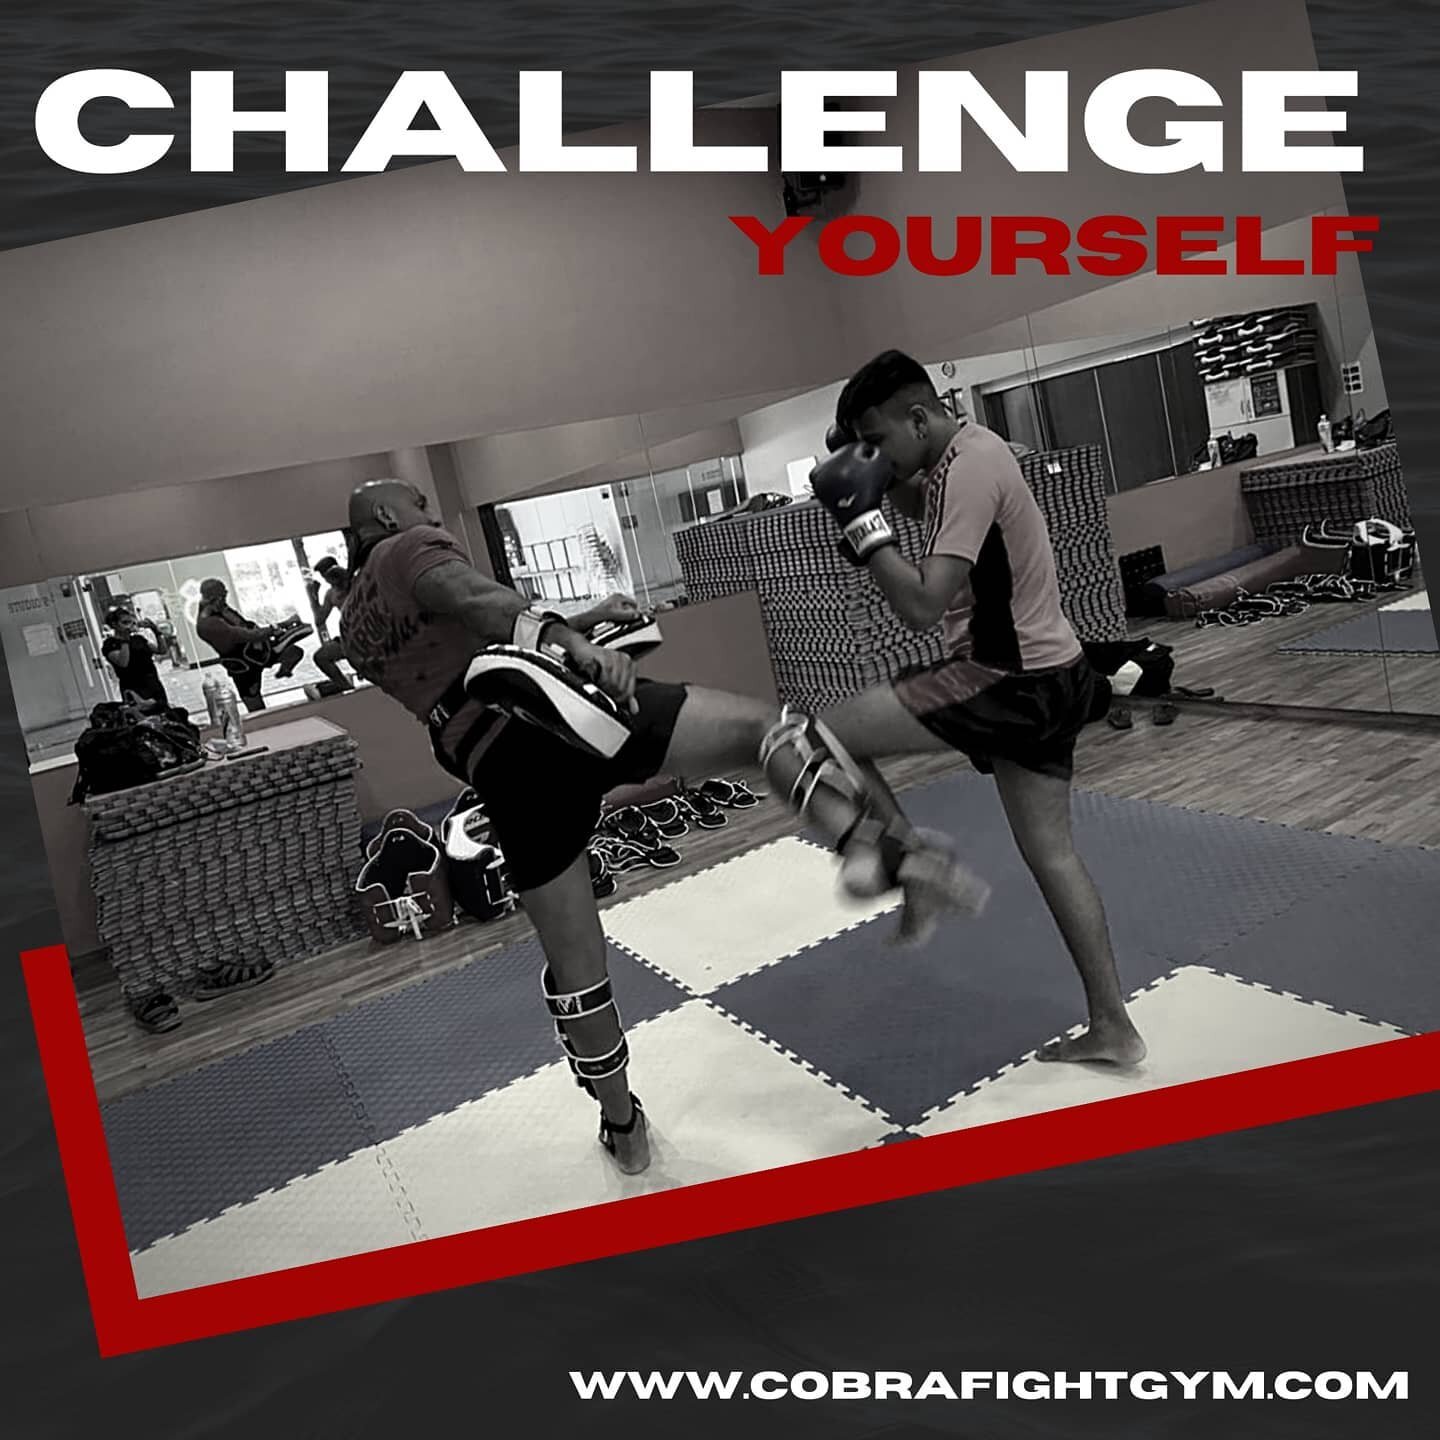 It's Monday -- how are you challenging yourself this week? New kickboxing term starts this Sunday 🥊
.
.
.
#cobrafightgym #singapore #getmotivated #fitfam #weightloss #buildmuscle #getfit #fitness #boxing #boxingcoach #muaythai #kickboxing #boxingdri